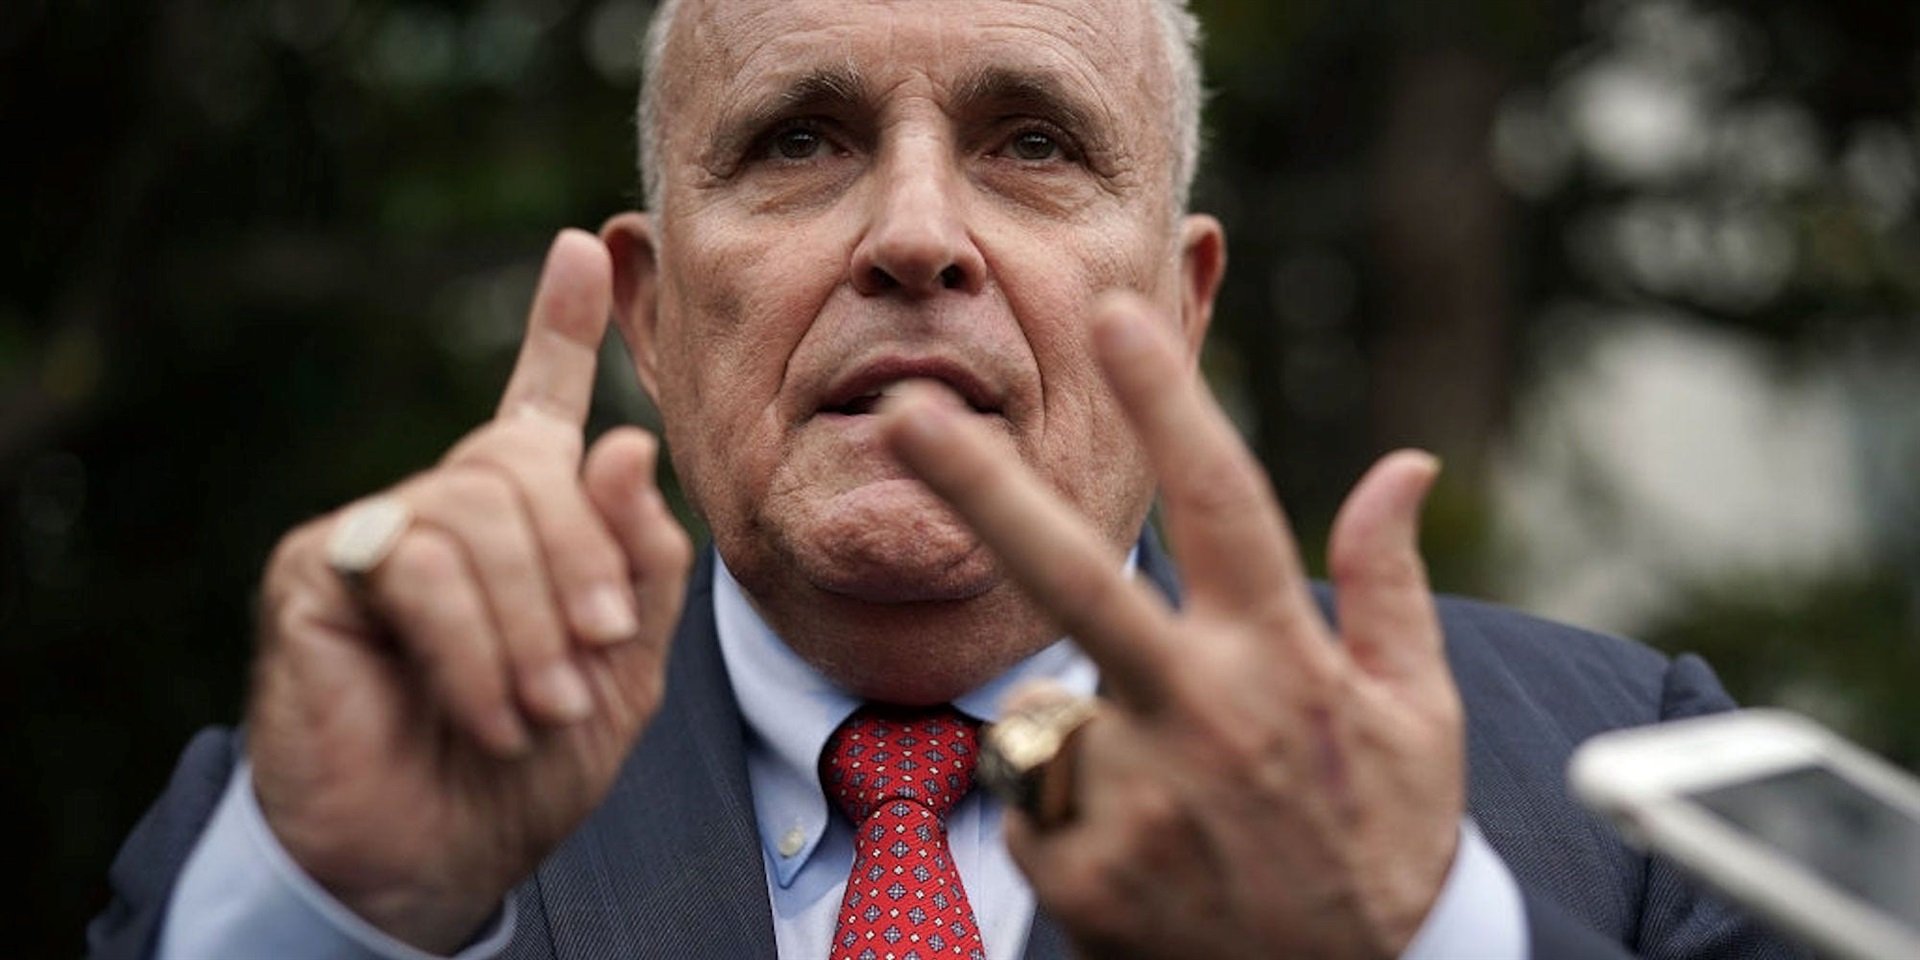 Why Rudy Giuliani's video upload has him in hot water